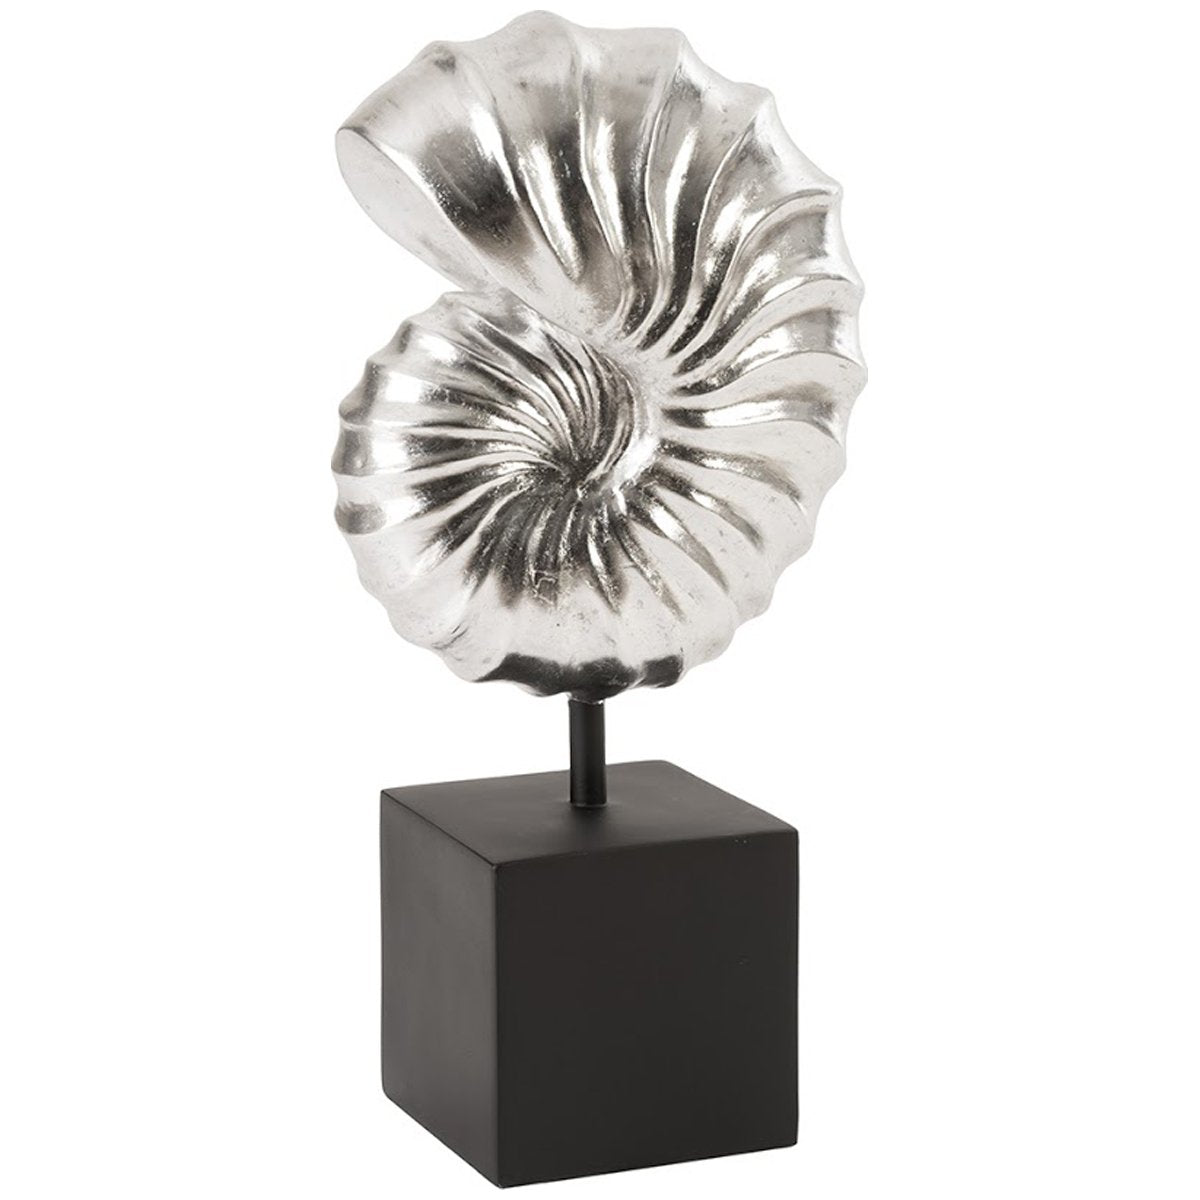 Phillips Collection Nautilus Shell Sculpture on Base